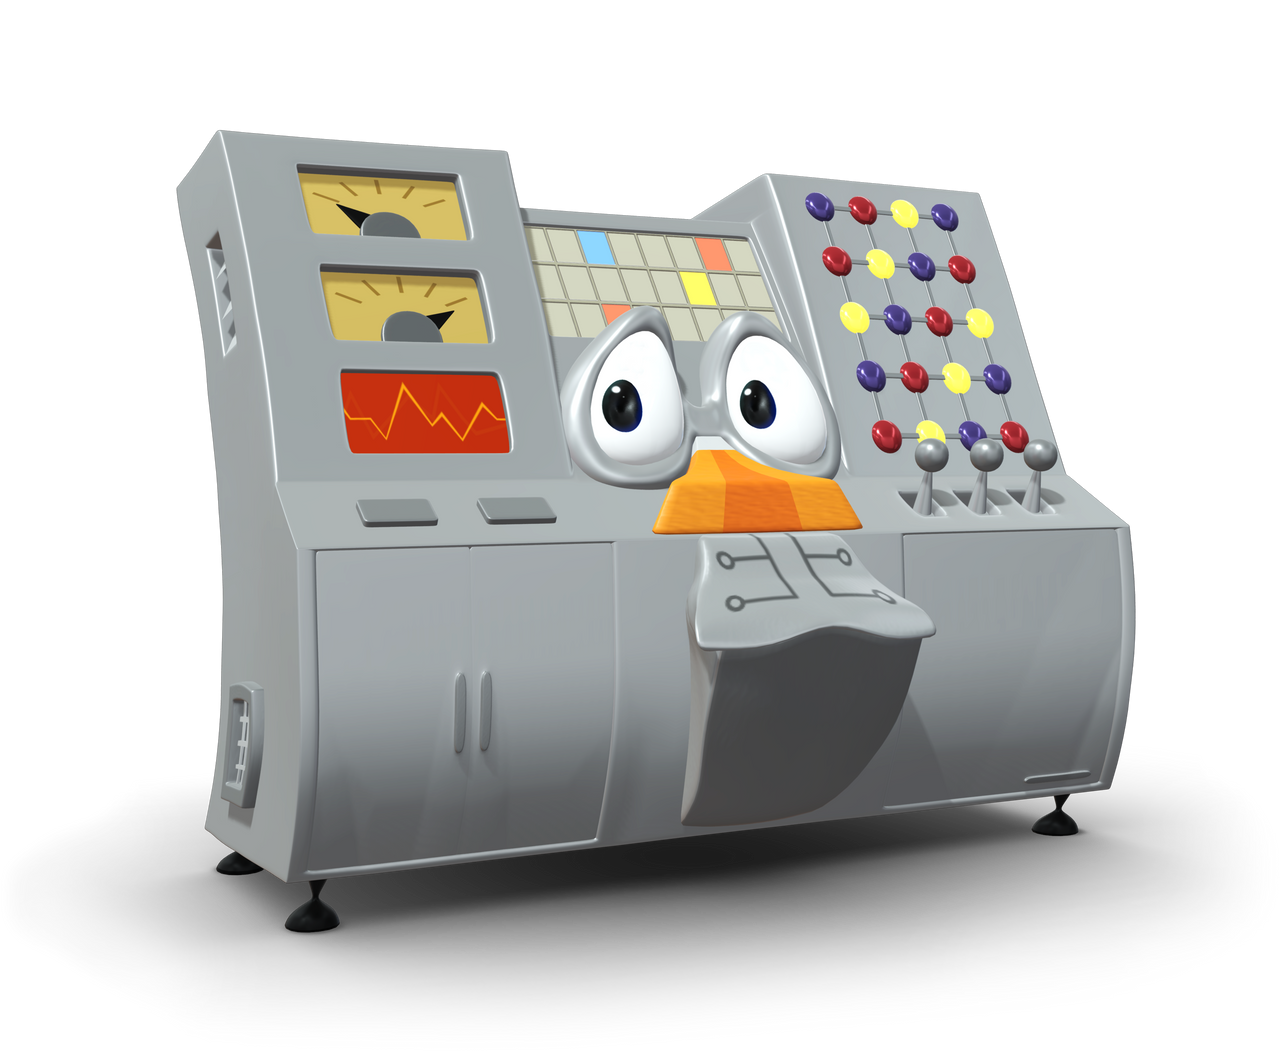 _the_brave_little_toaster__wittgenstein_render_by_fawfulthegreat64_dffiuci-fullview.png